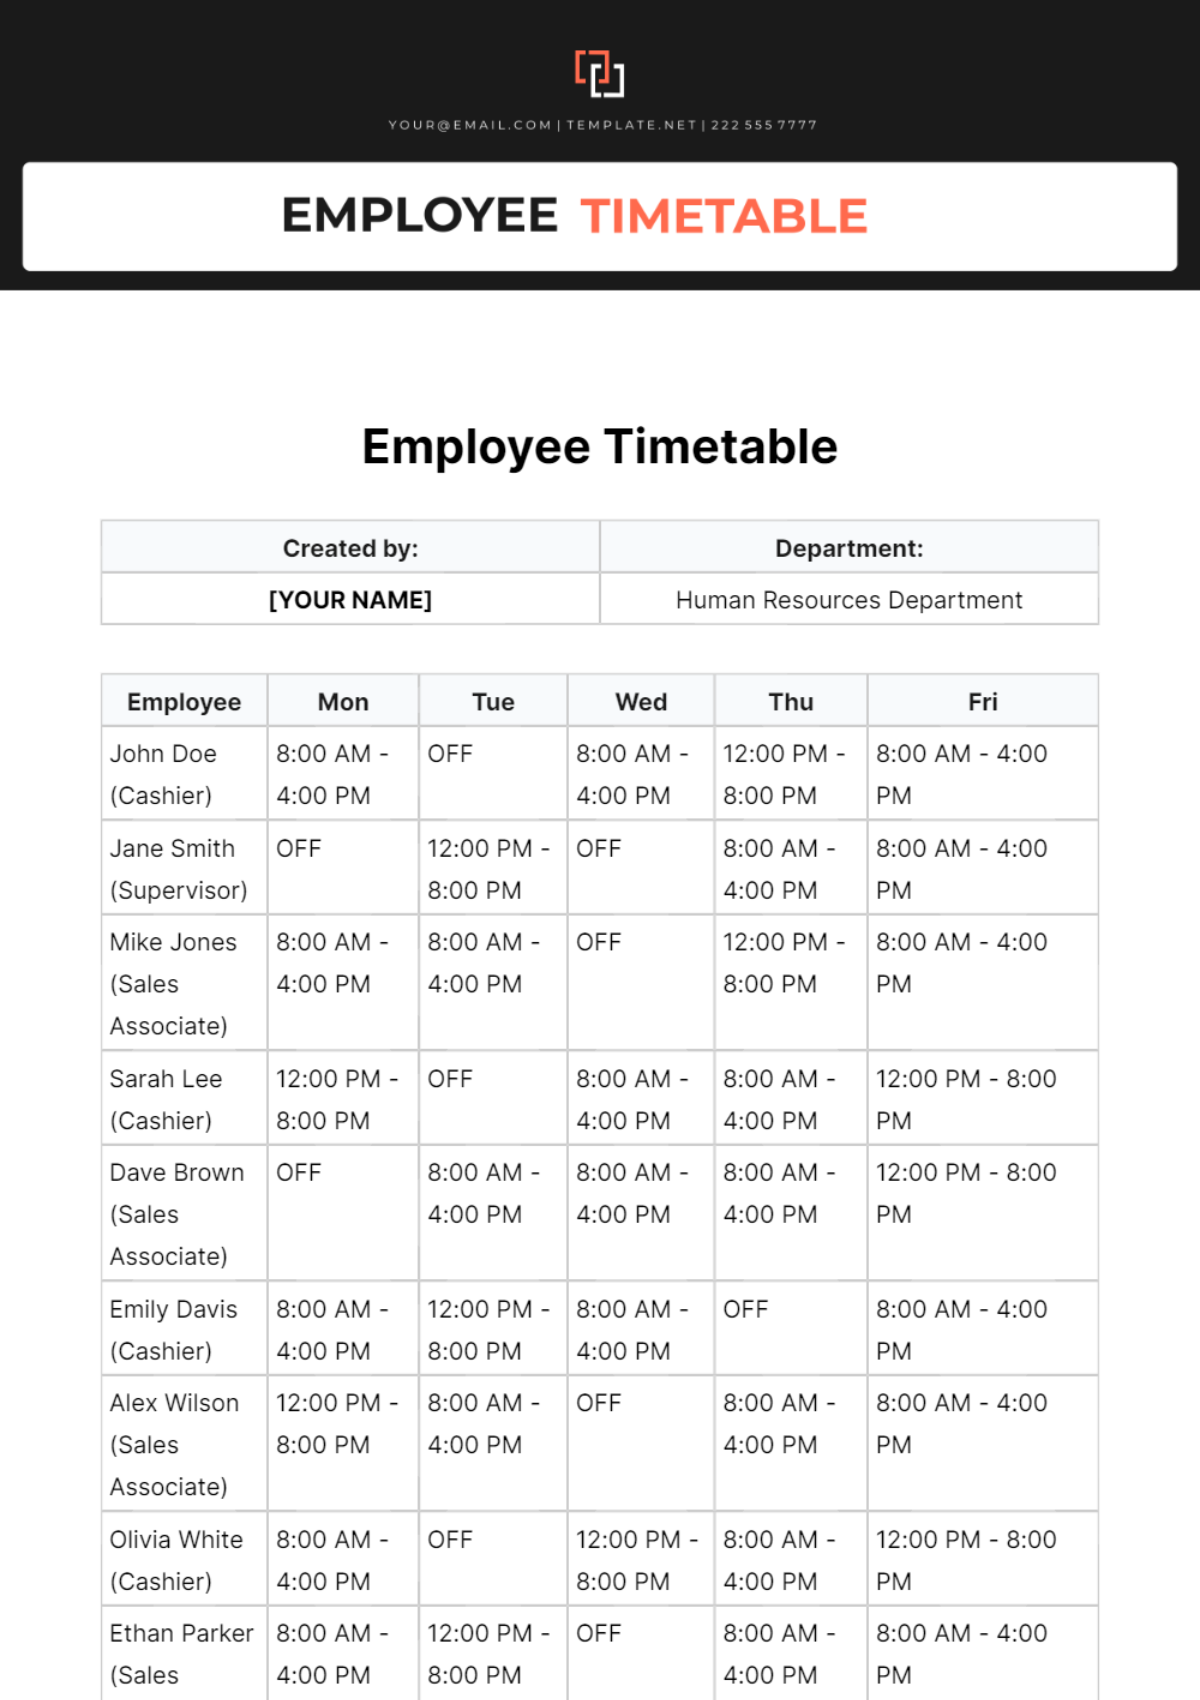 Employee Timetable Template